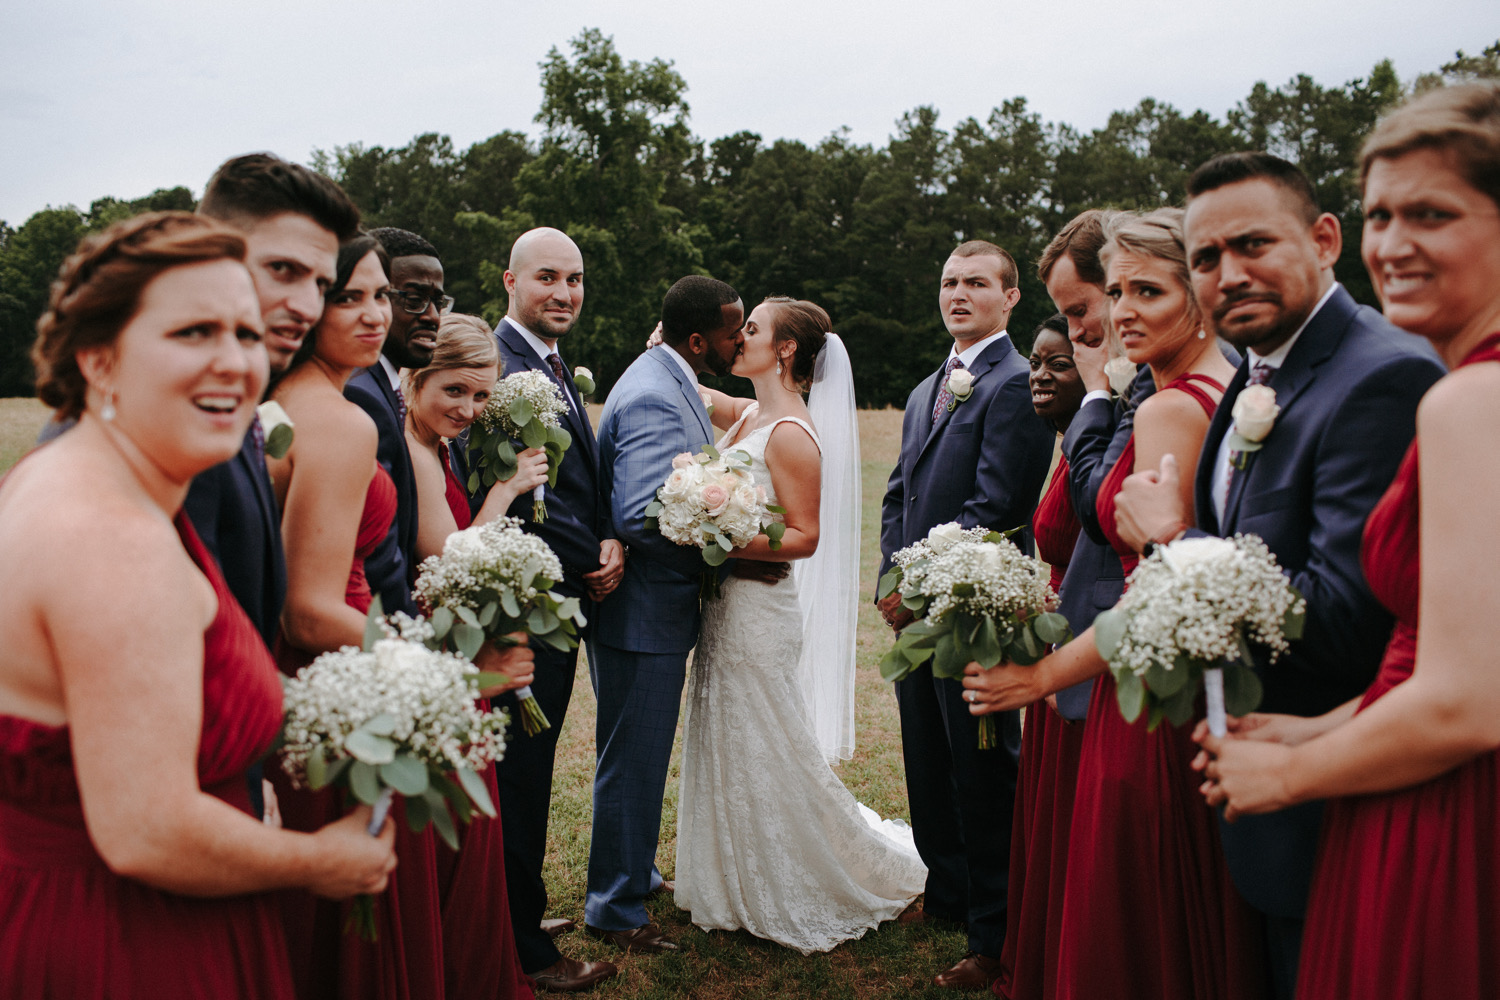 Kathryn & Wally Wedding: The Little Herb House - Casie Weathers Photography